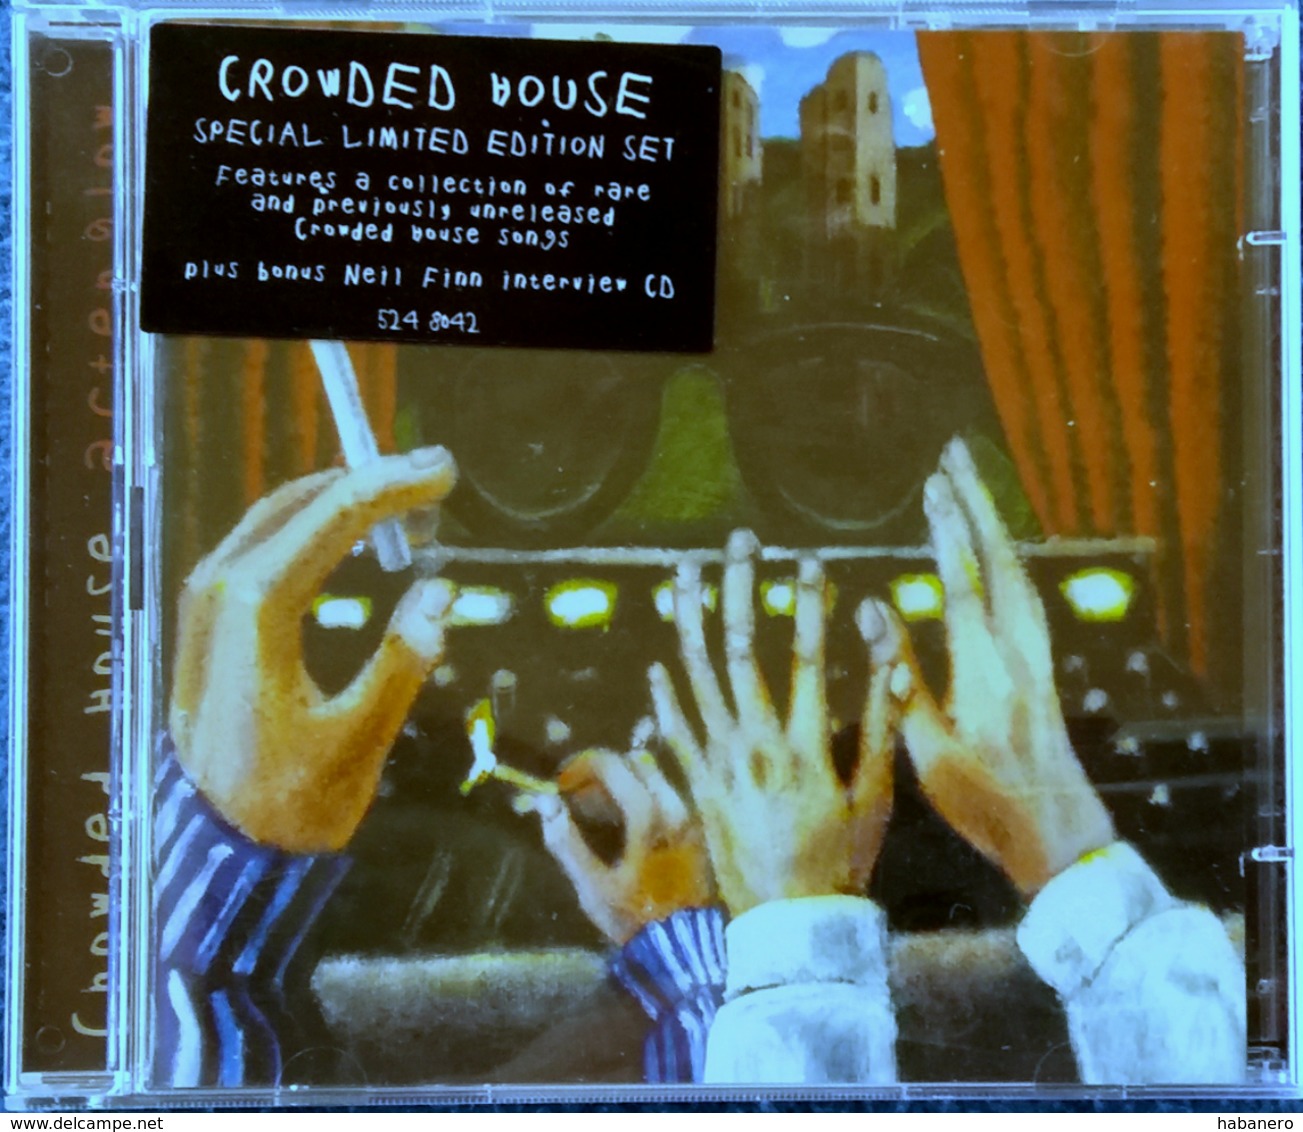 CROWDED HOUSE - AFTERGLOW - SPECIAL LIMITED EDITION SET - Rock